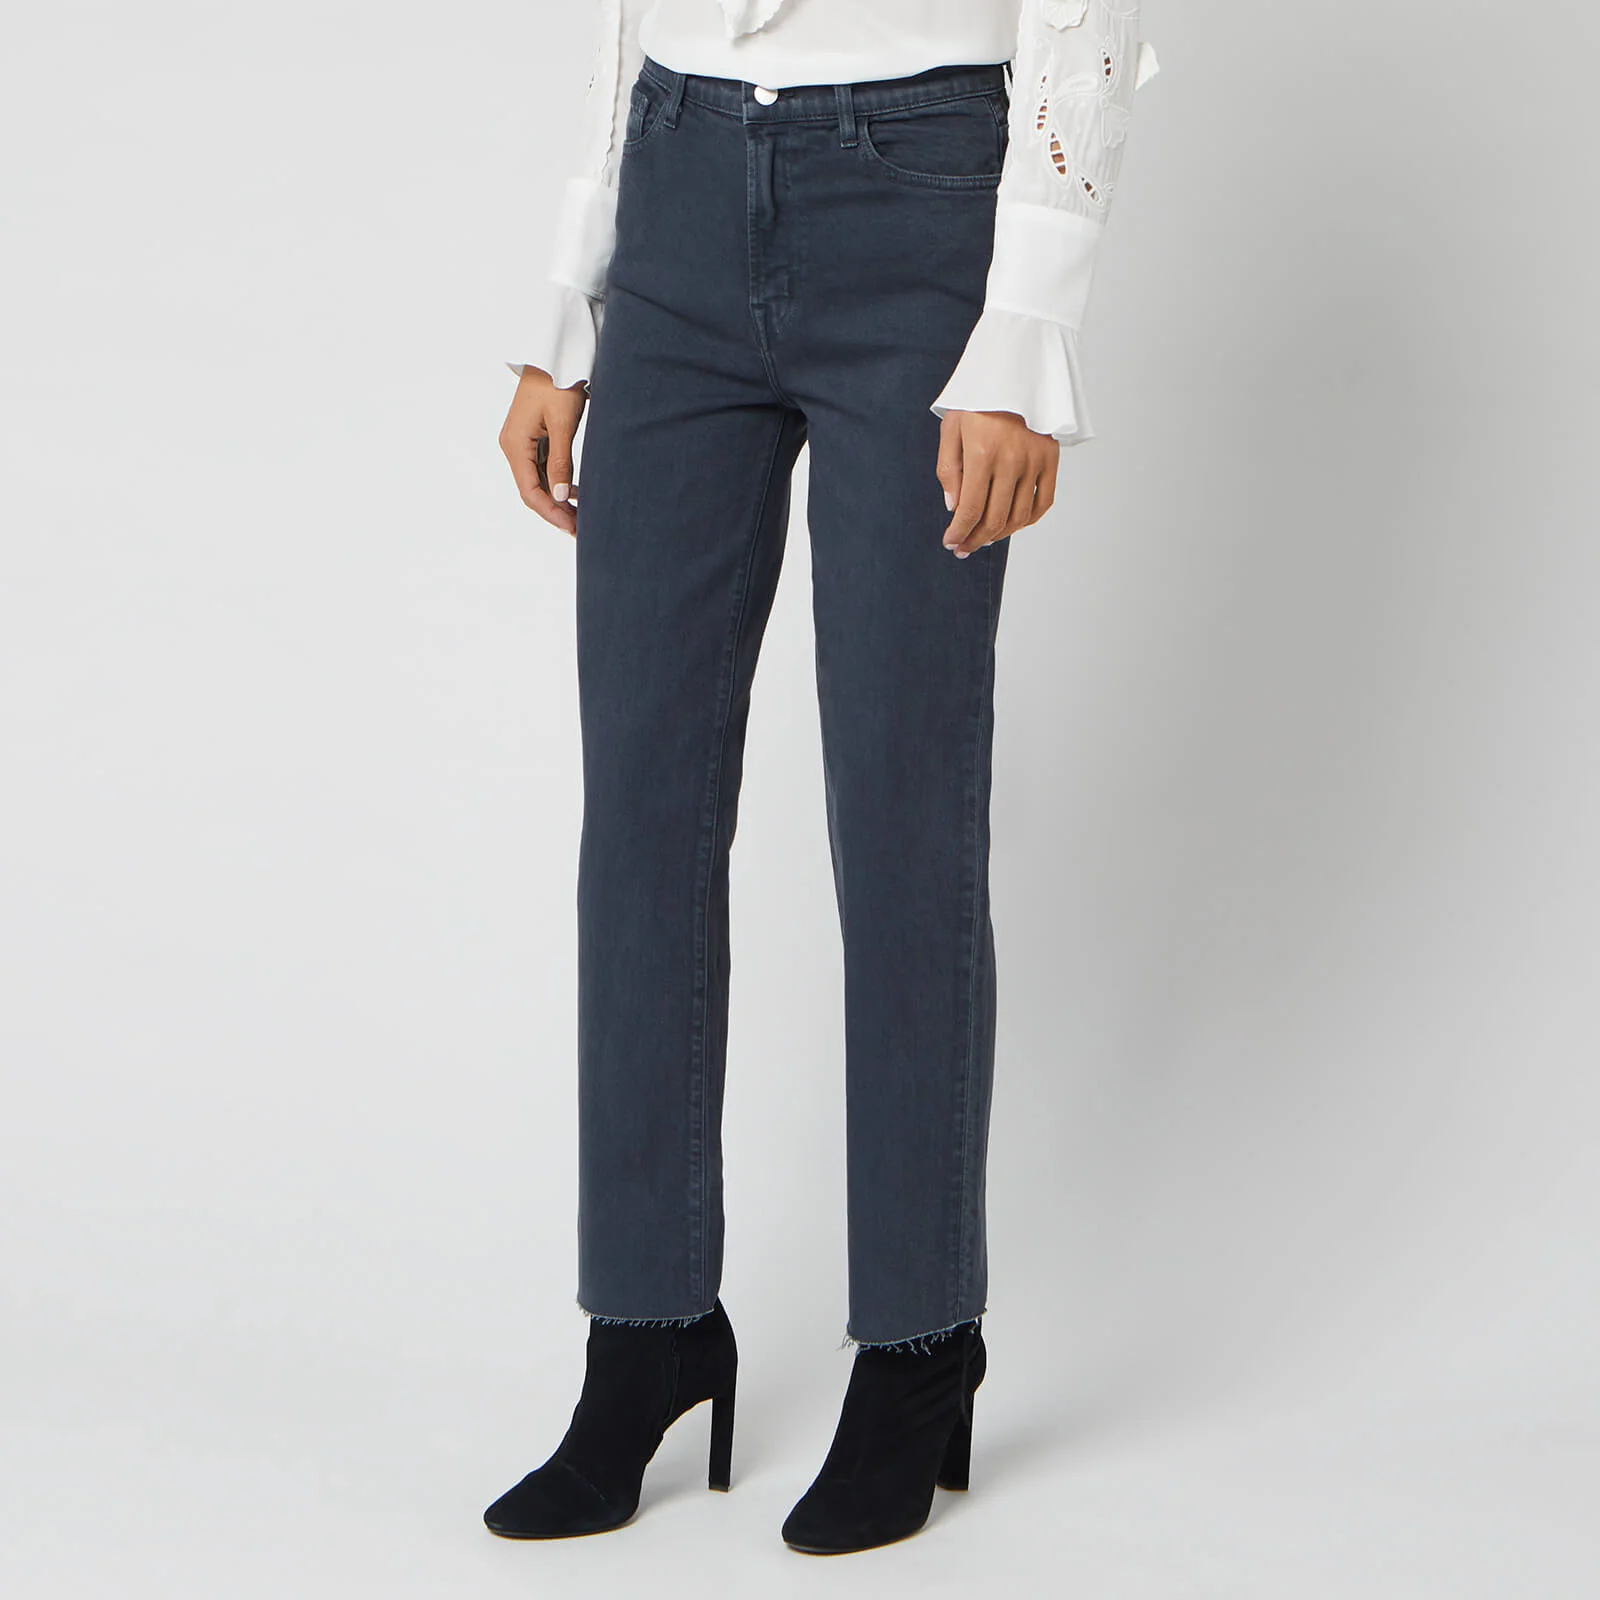 J Brand Women's Jules High Rise Straight Jeans - Shady Image 1